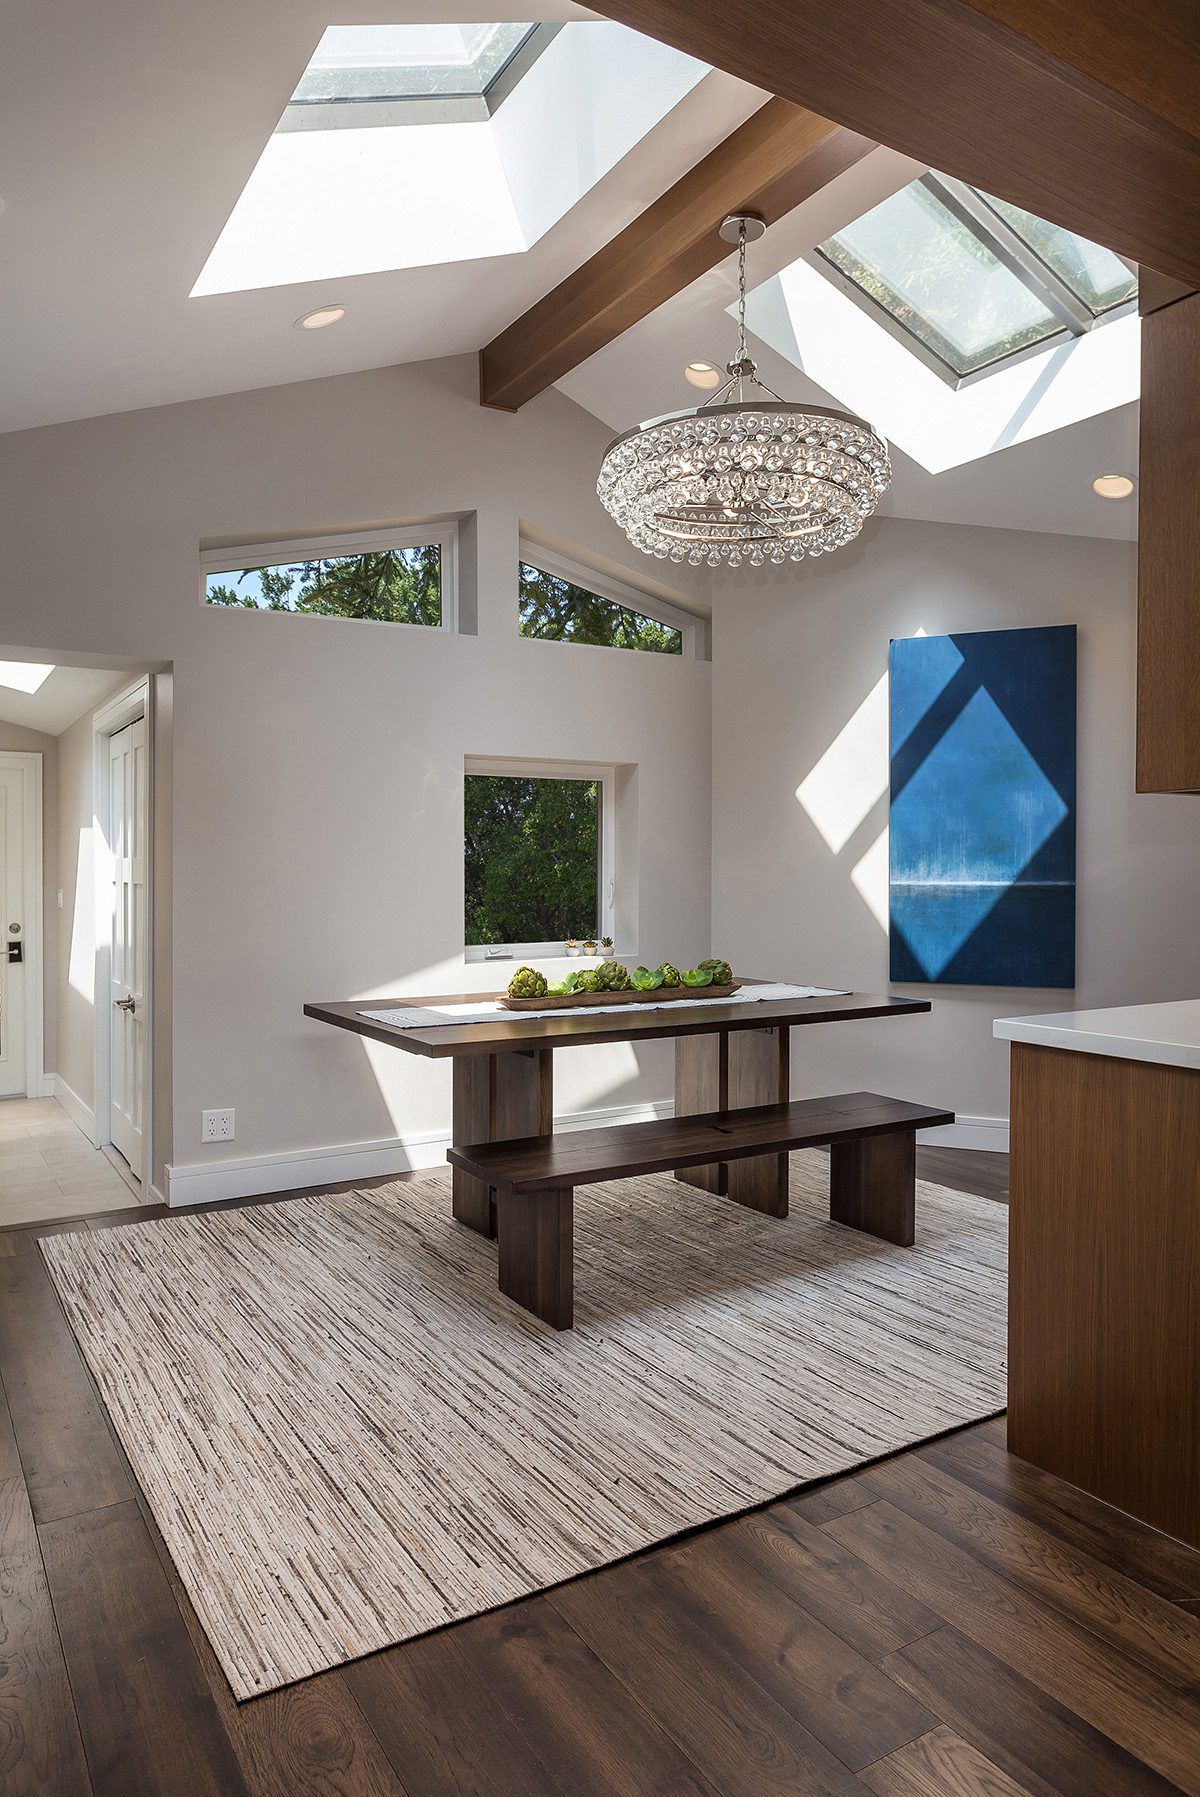 this home addition was remodeled with the idea that it would become the dining room, after serving as a kitchen for years